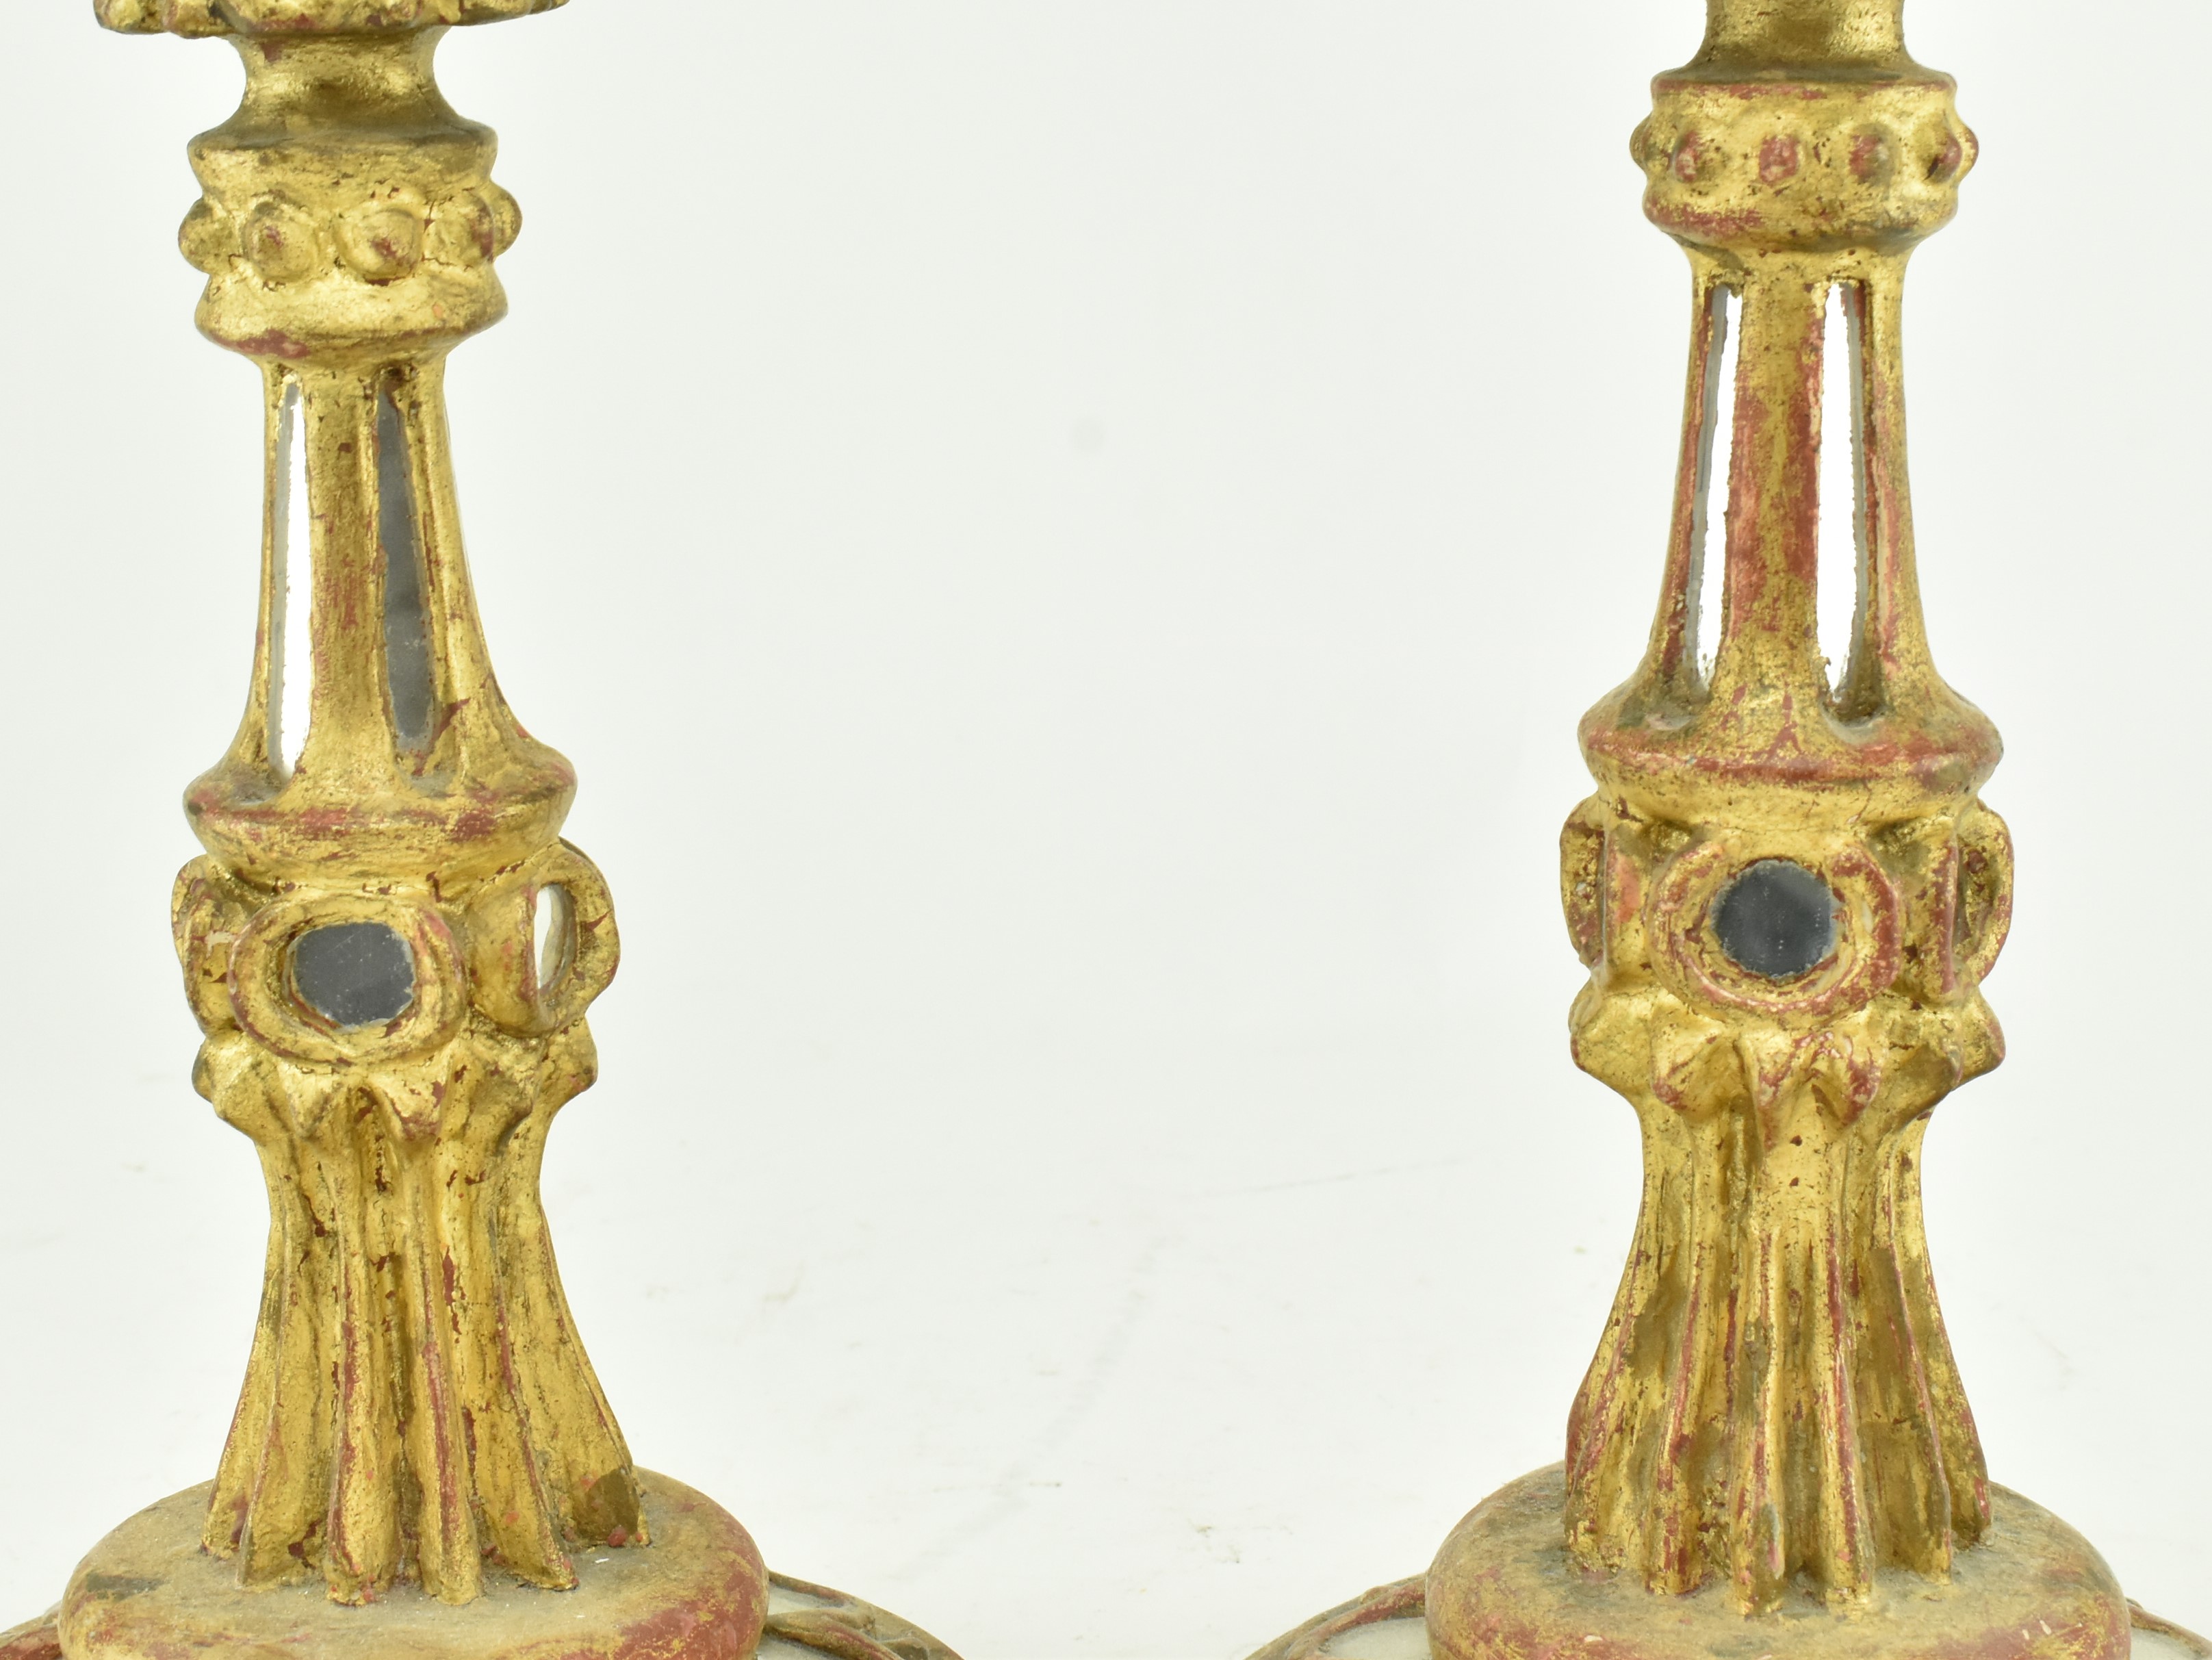 TWO INDIAN STYLE MIRRORED AND GILT WOOD CANDLESTICK HOLDERS - Image 4 of 7